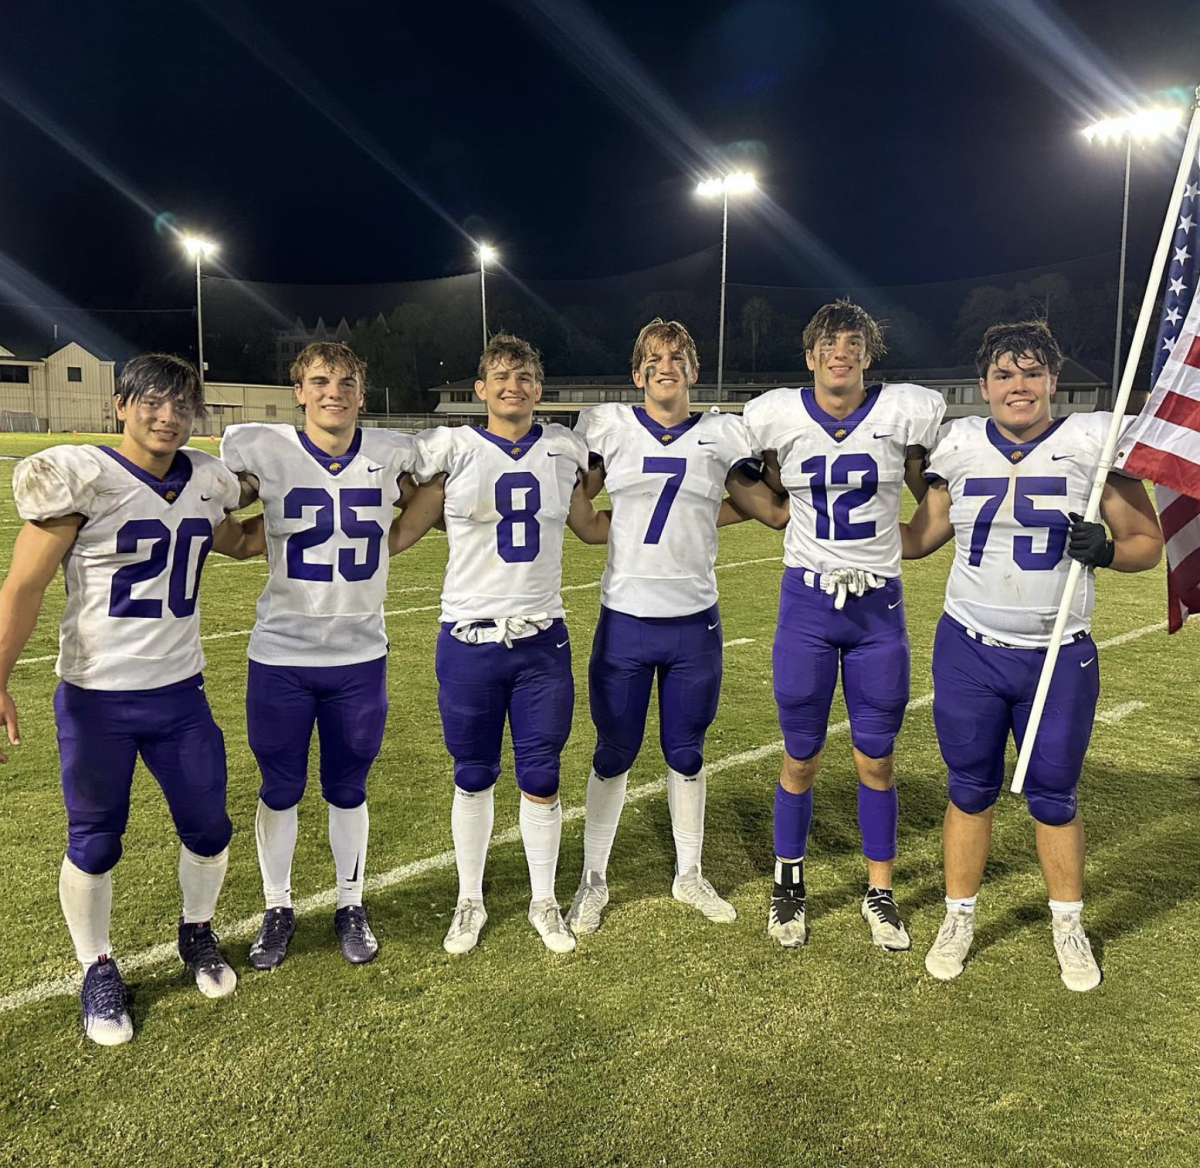 Varsity football players pose after the Battle of Whataburger game. From L to R: Miles Roeder, George Kugle, Boyd Holcomb, Read Liuzzi, Parker Kubitza and Oliver Eades.